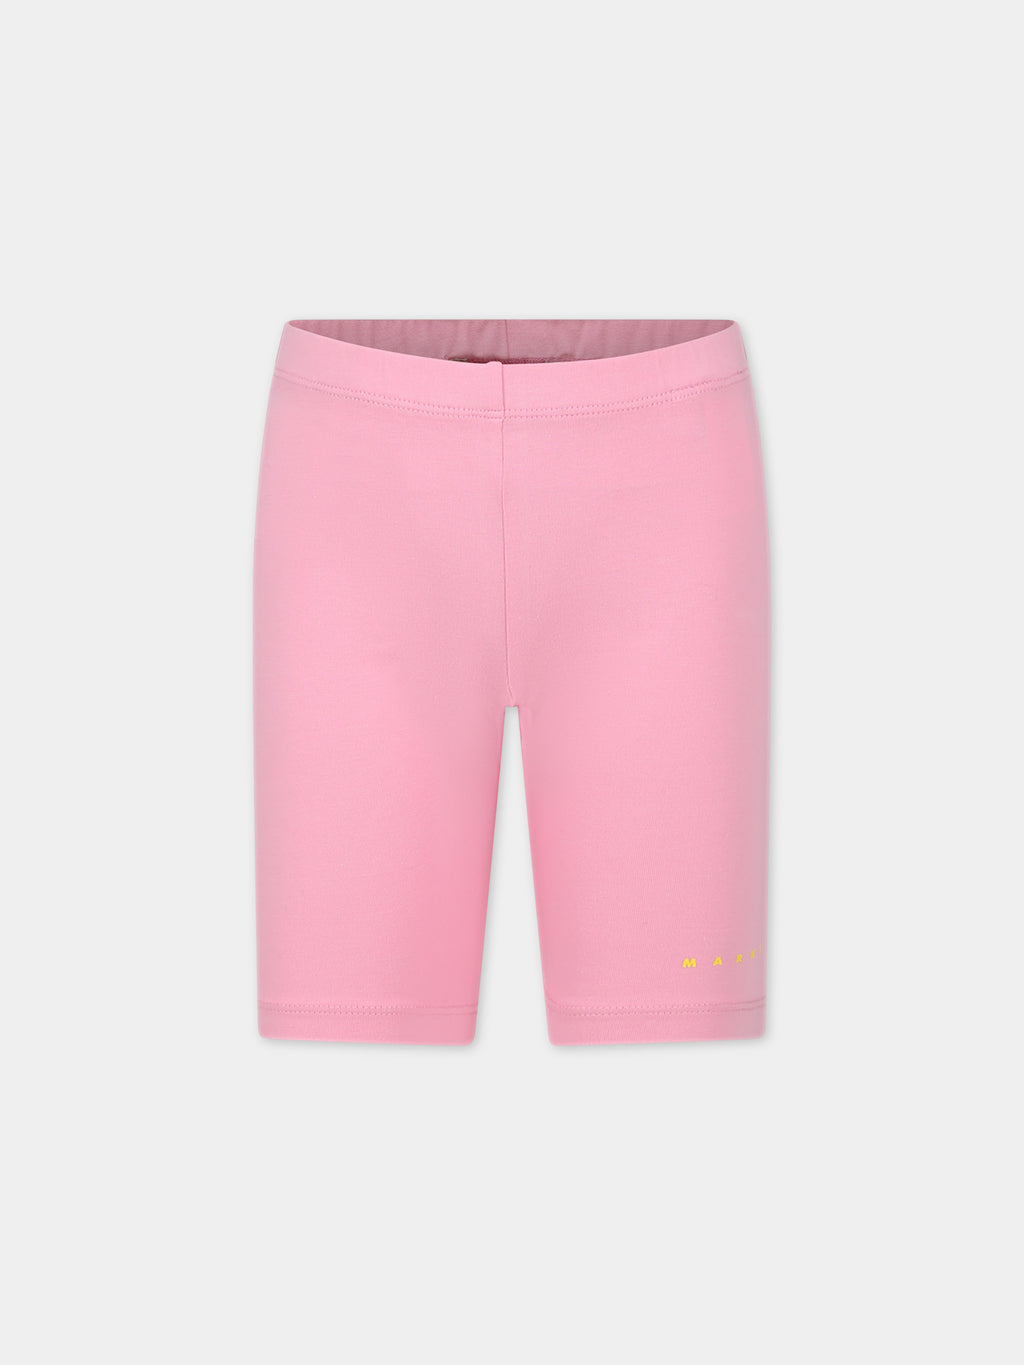 Pink sports shorts for girl